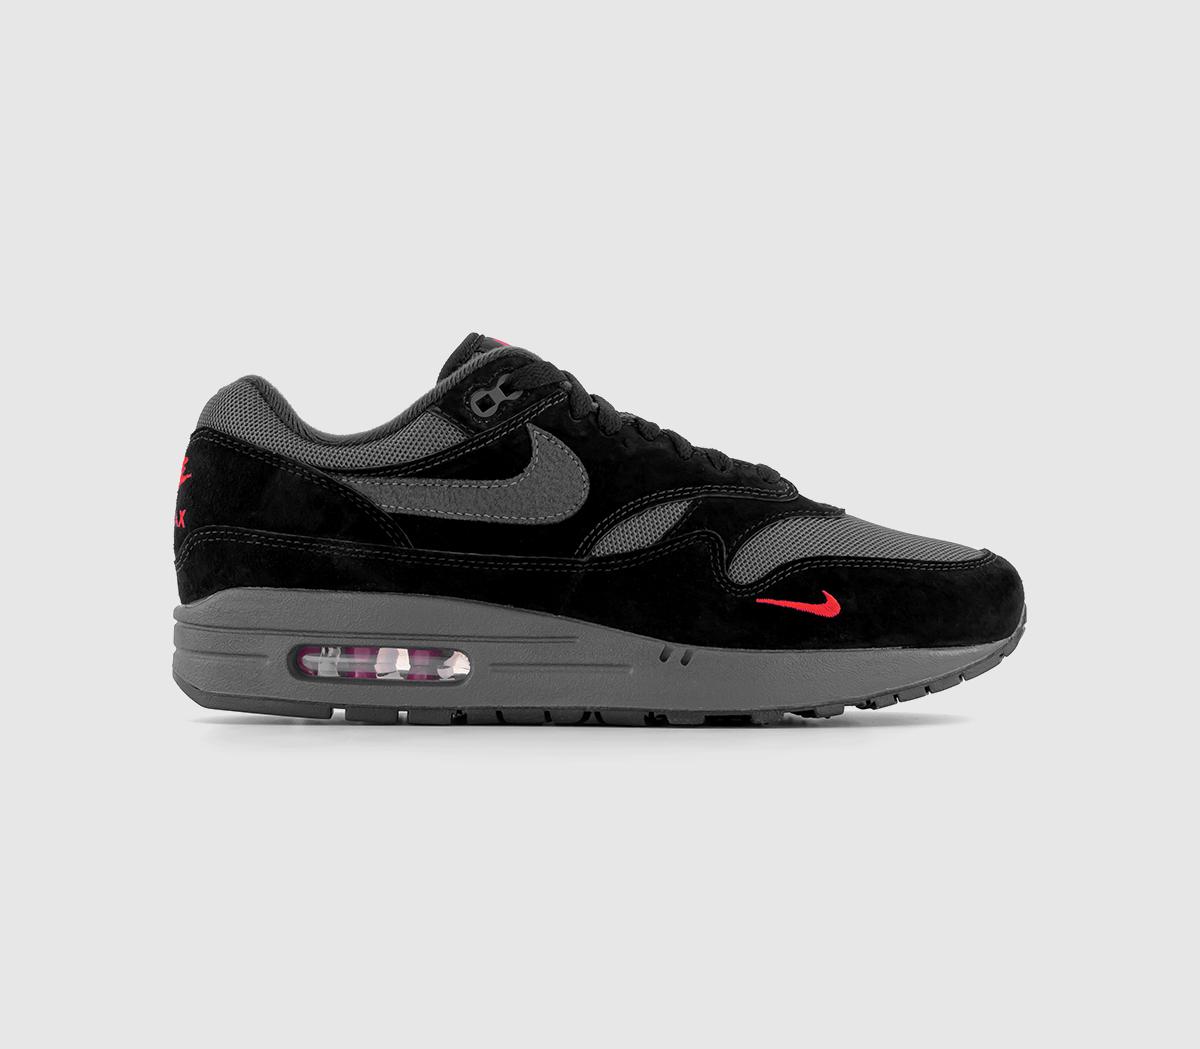 NikeAir Max 1 Trainers Black Anthracite University Red